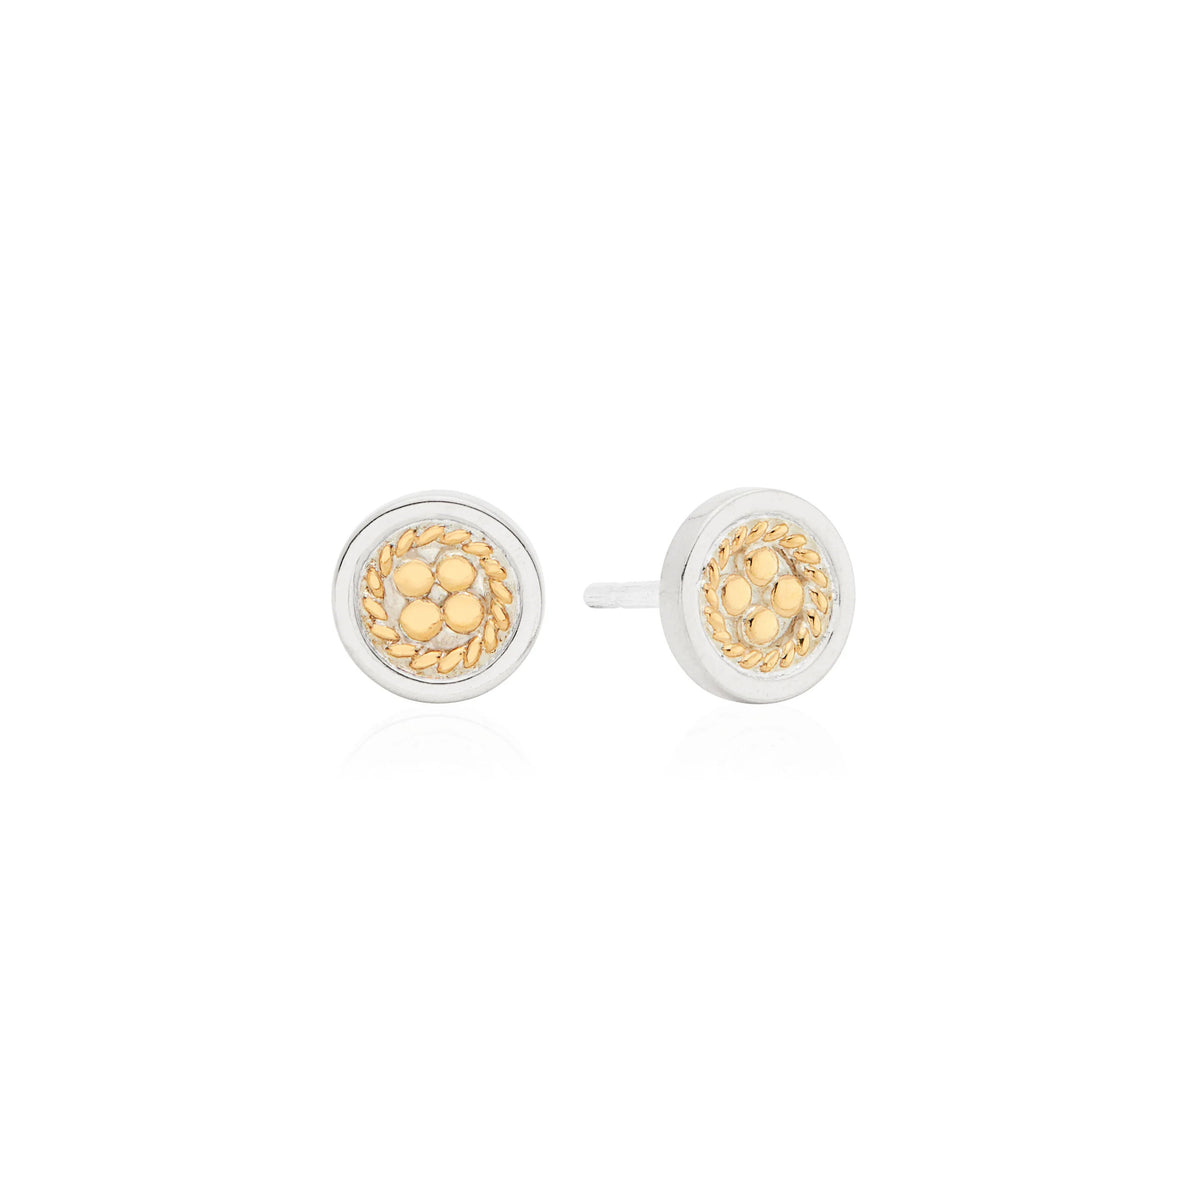 Anna Beck Classic Smooth Border Mini Stud Earrings - Gold & Silver 